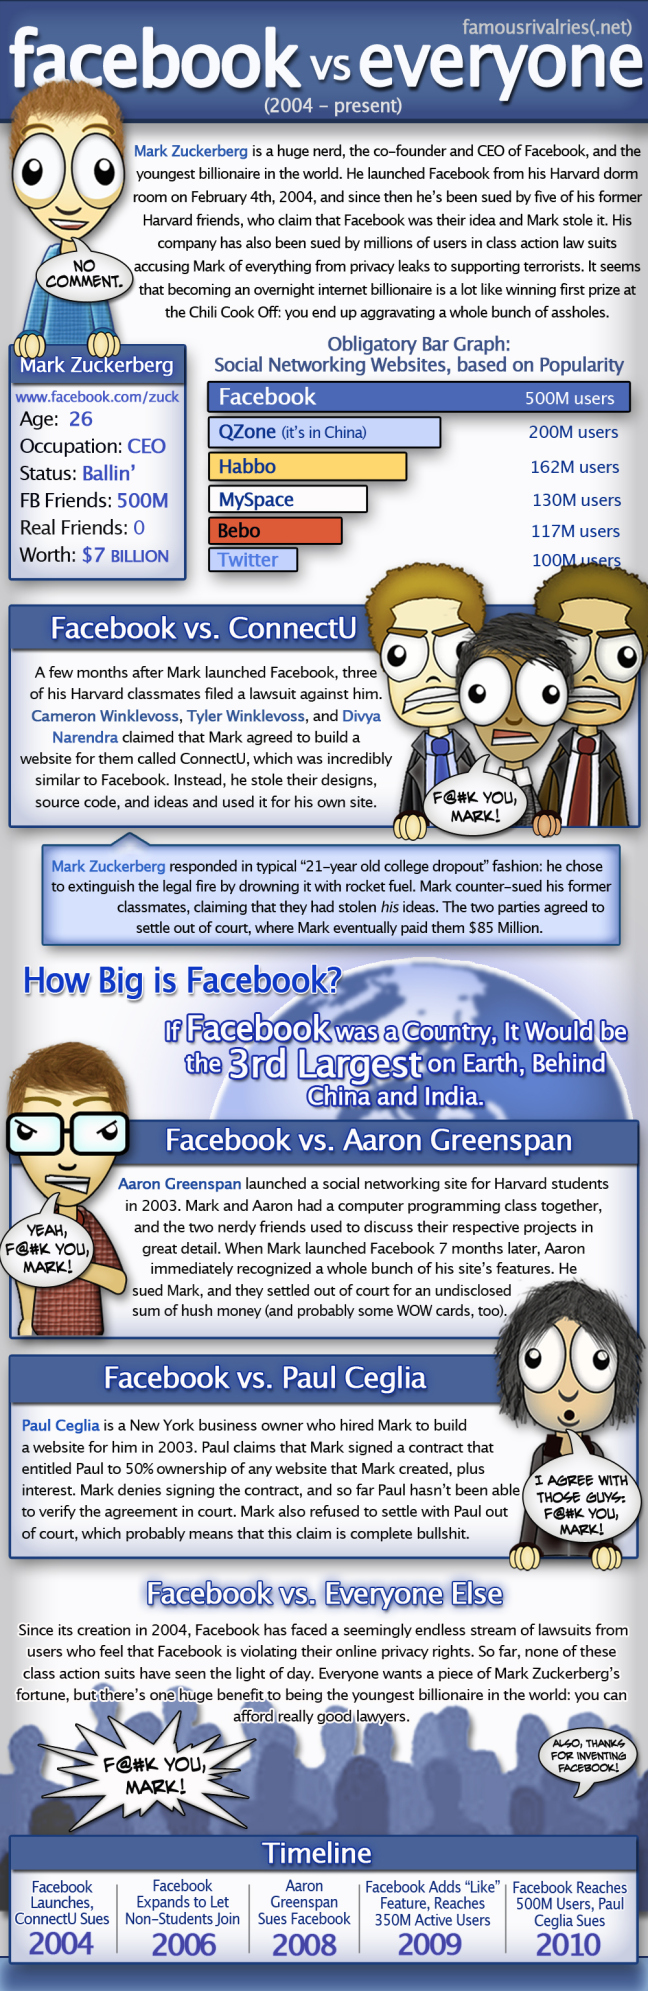 Famous Rivalries: Facebook vs. Everyone [Infographic]